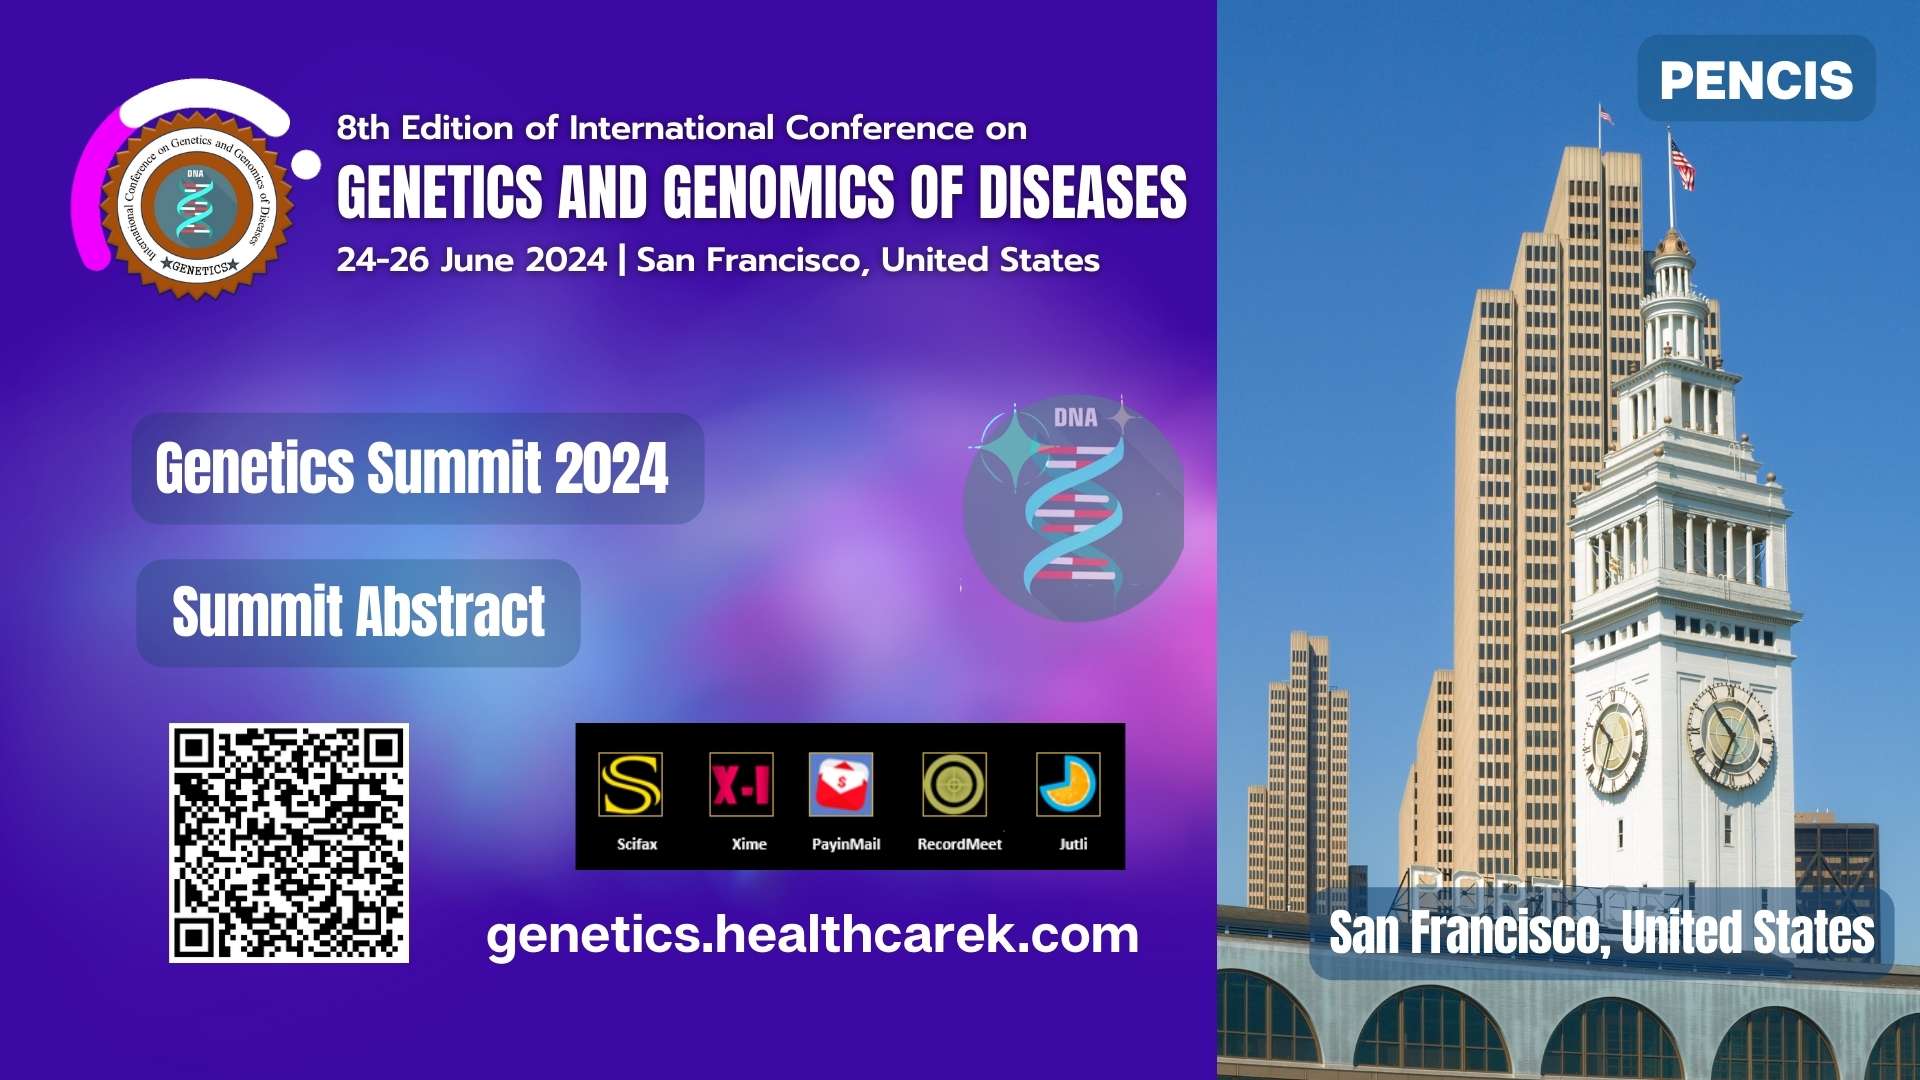 International Conference on Genetics and Genomics of Diseases